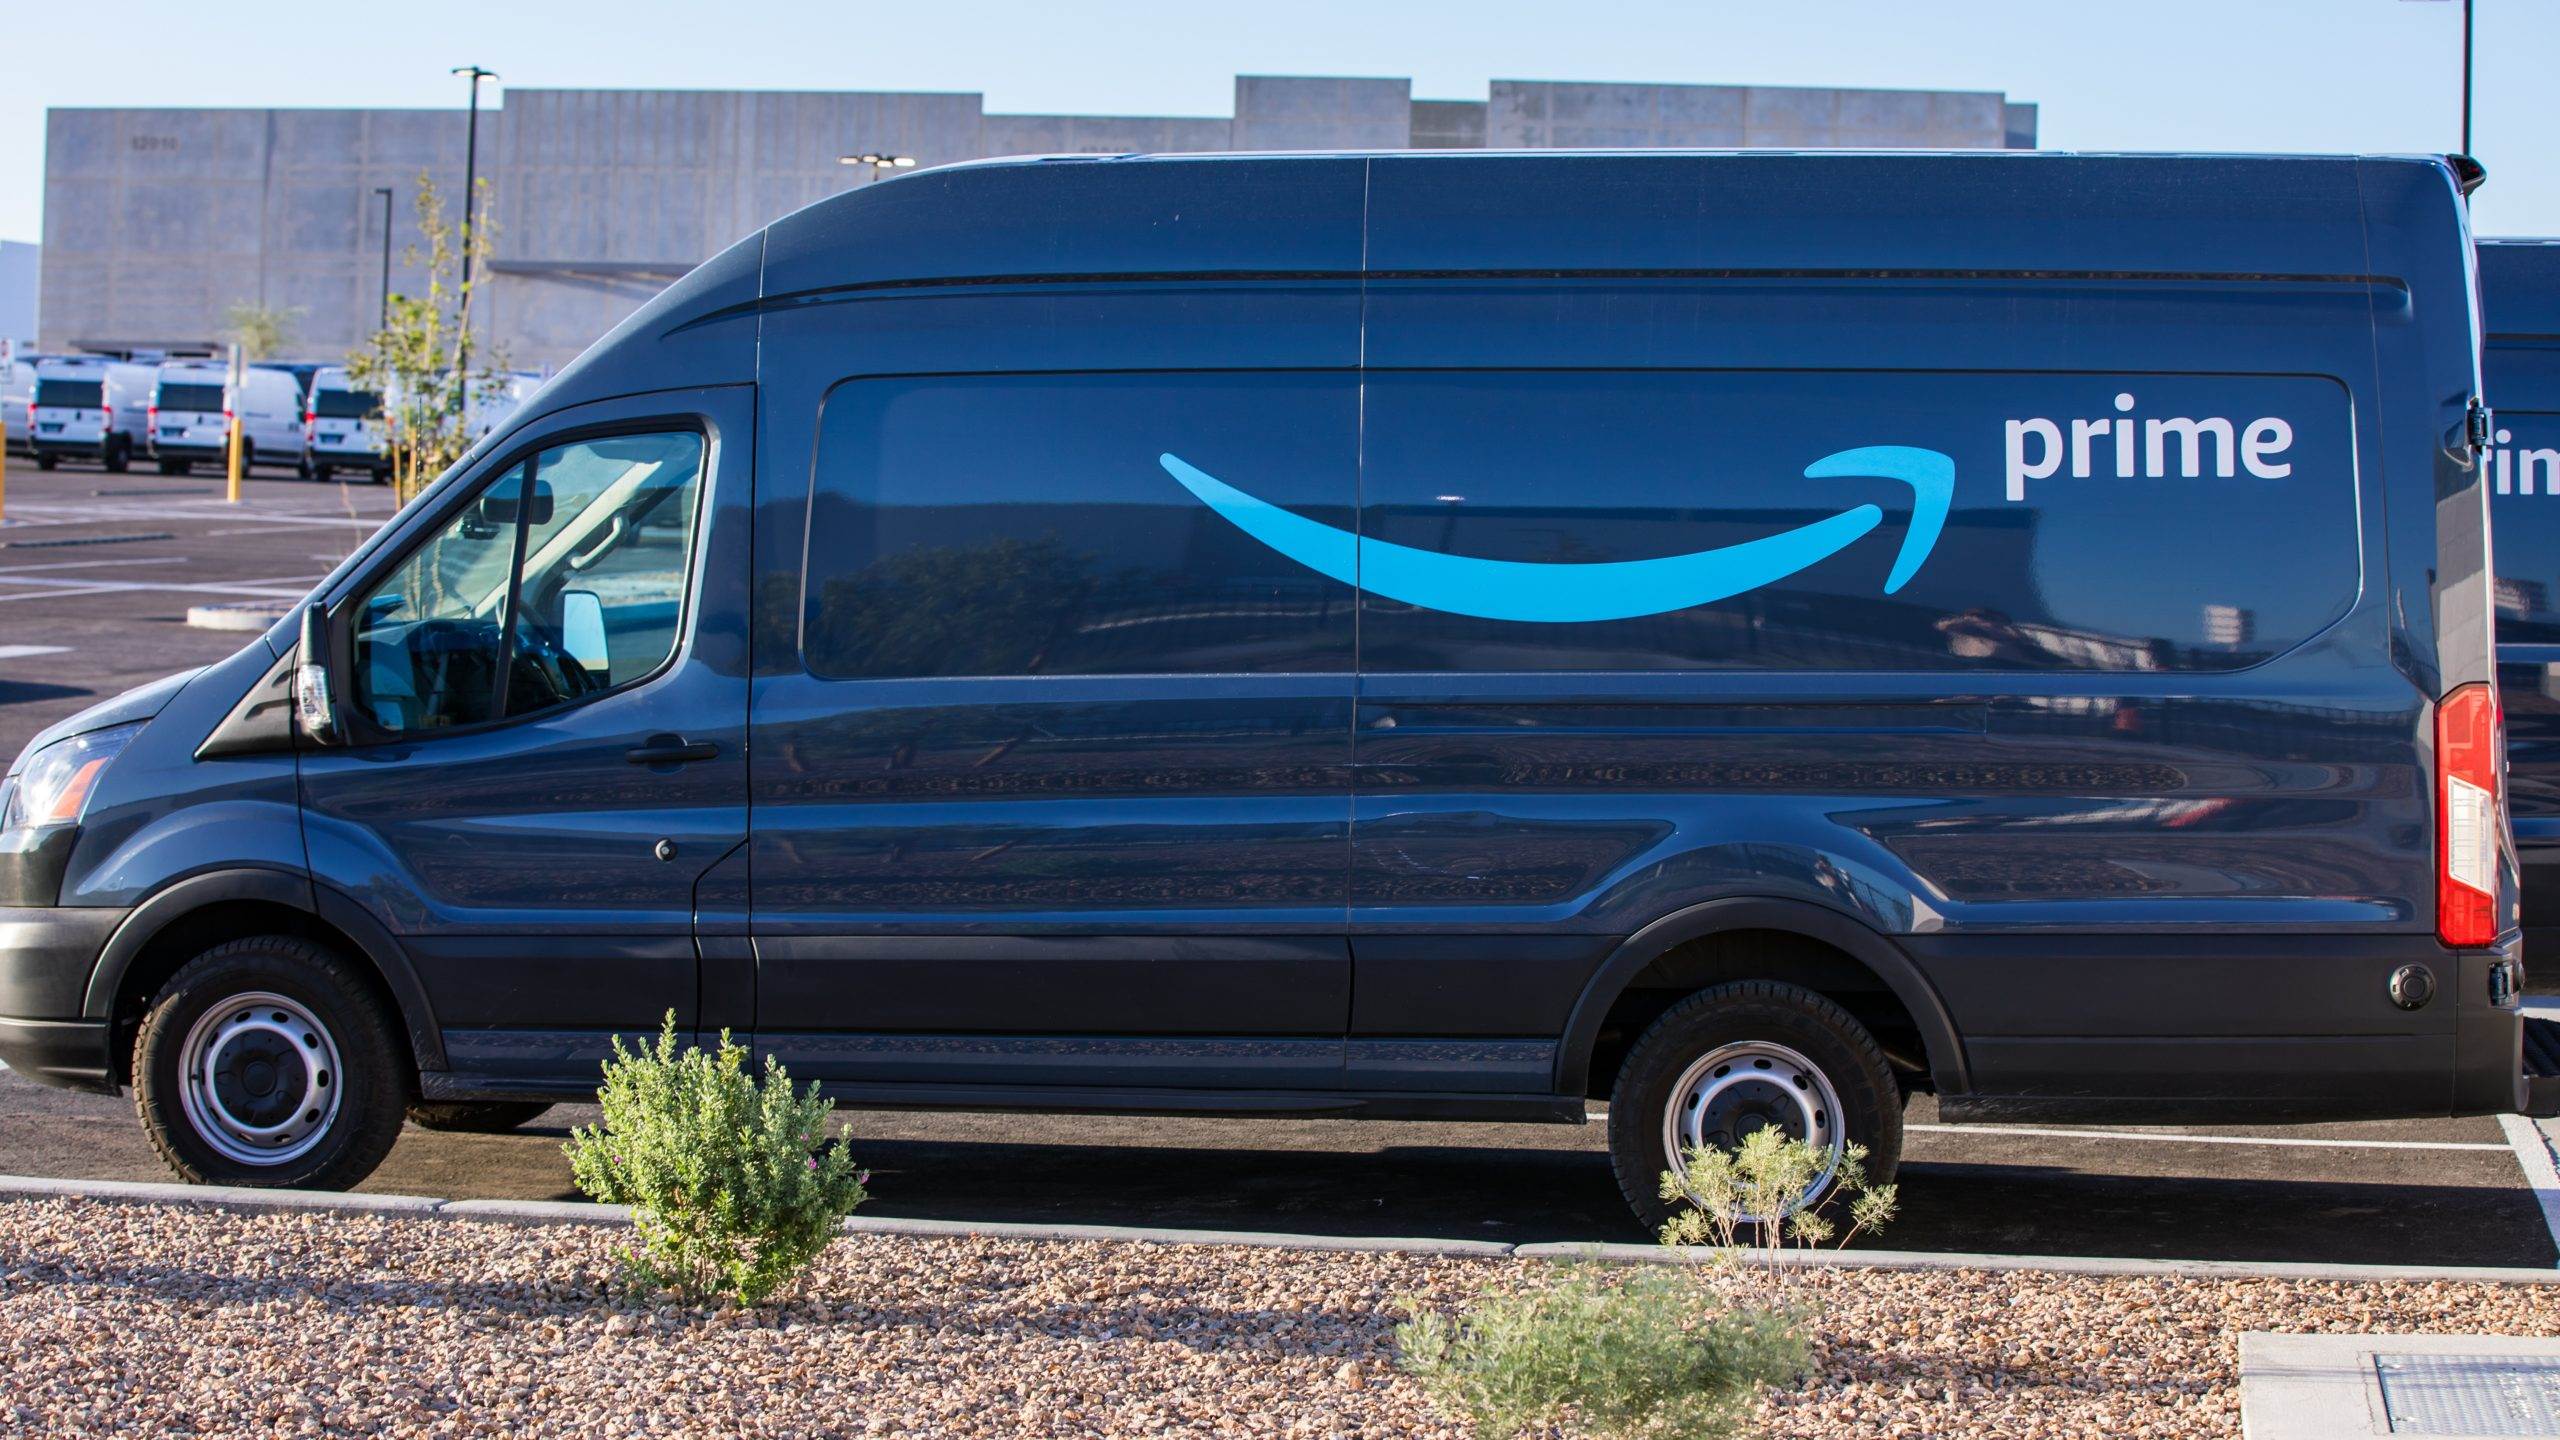 Suing Amazon for a Delivery Driver Hitting Your Car